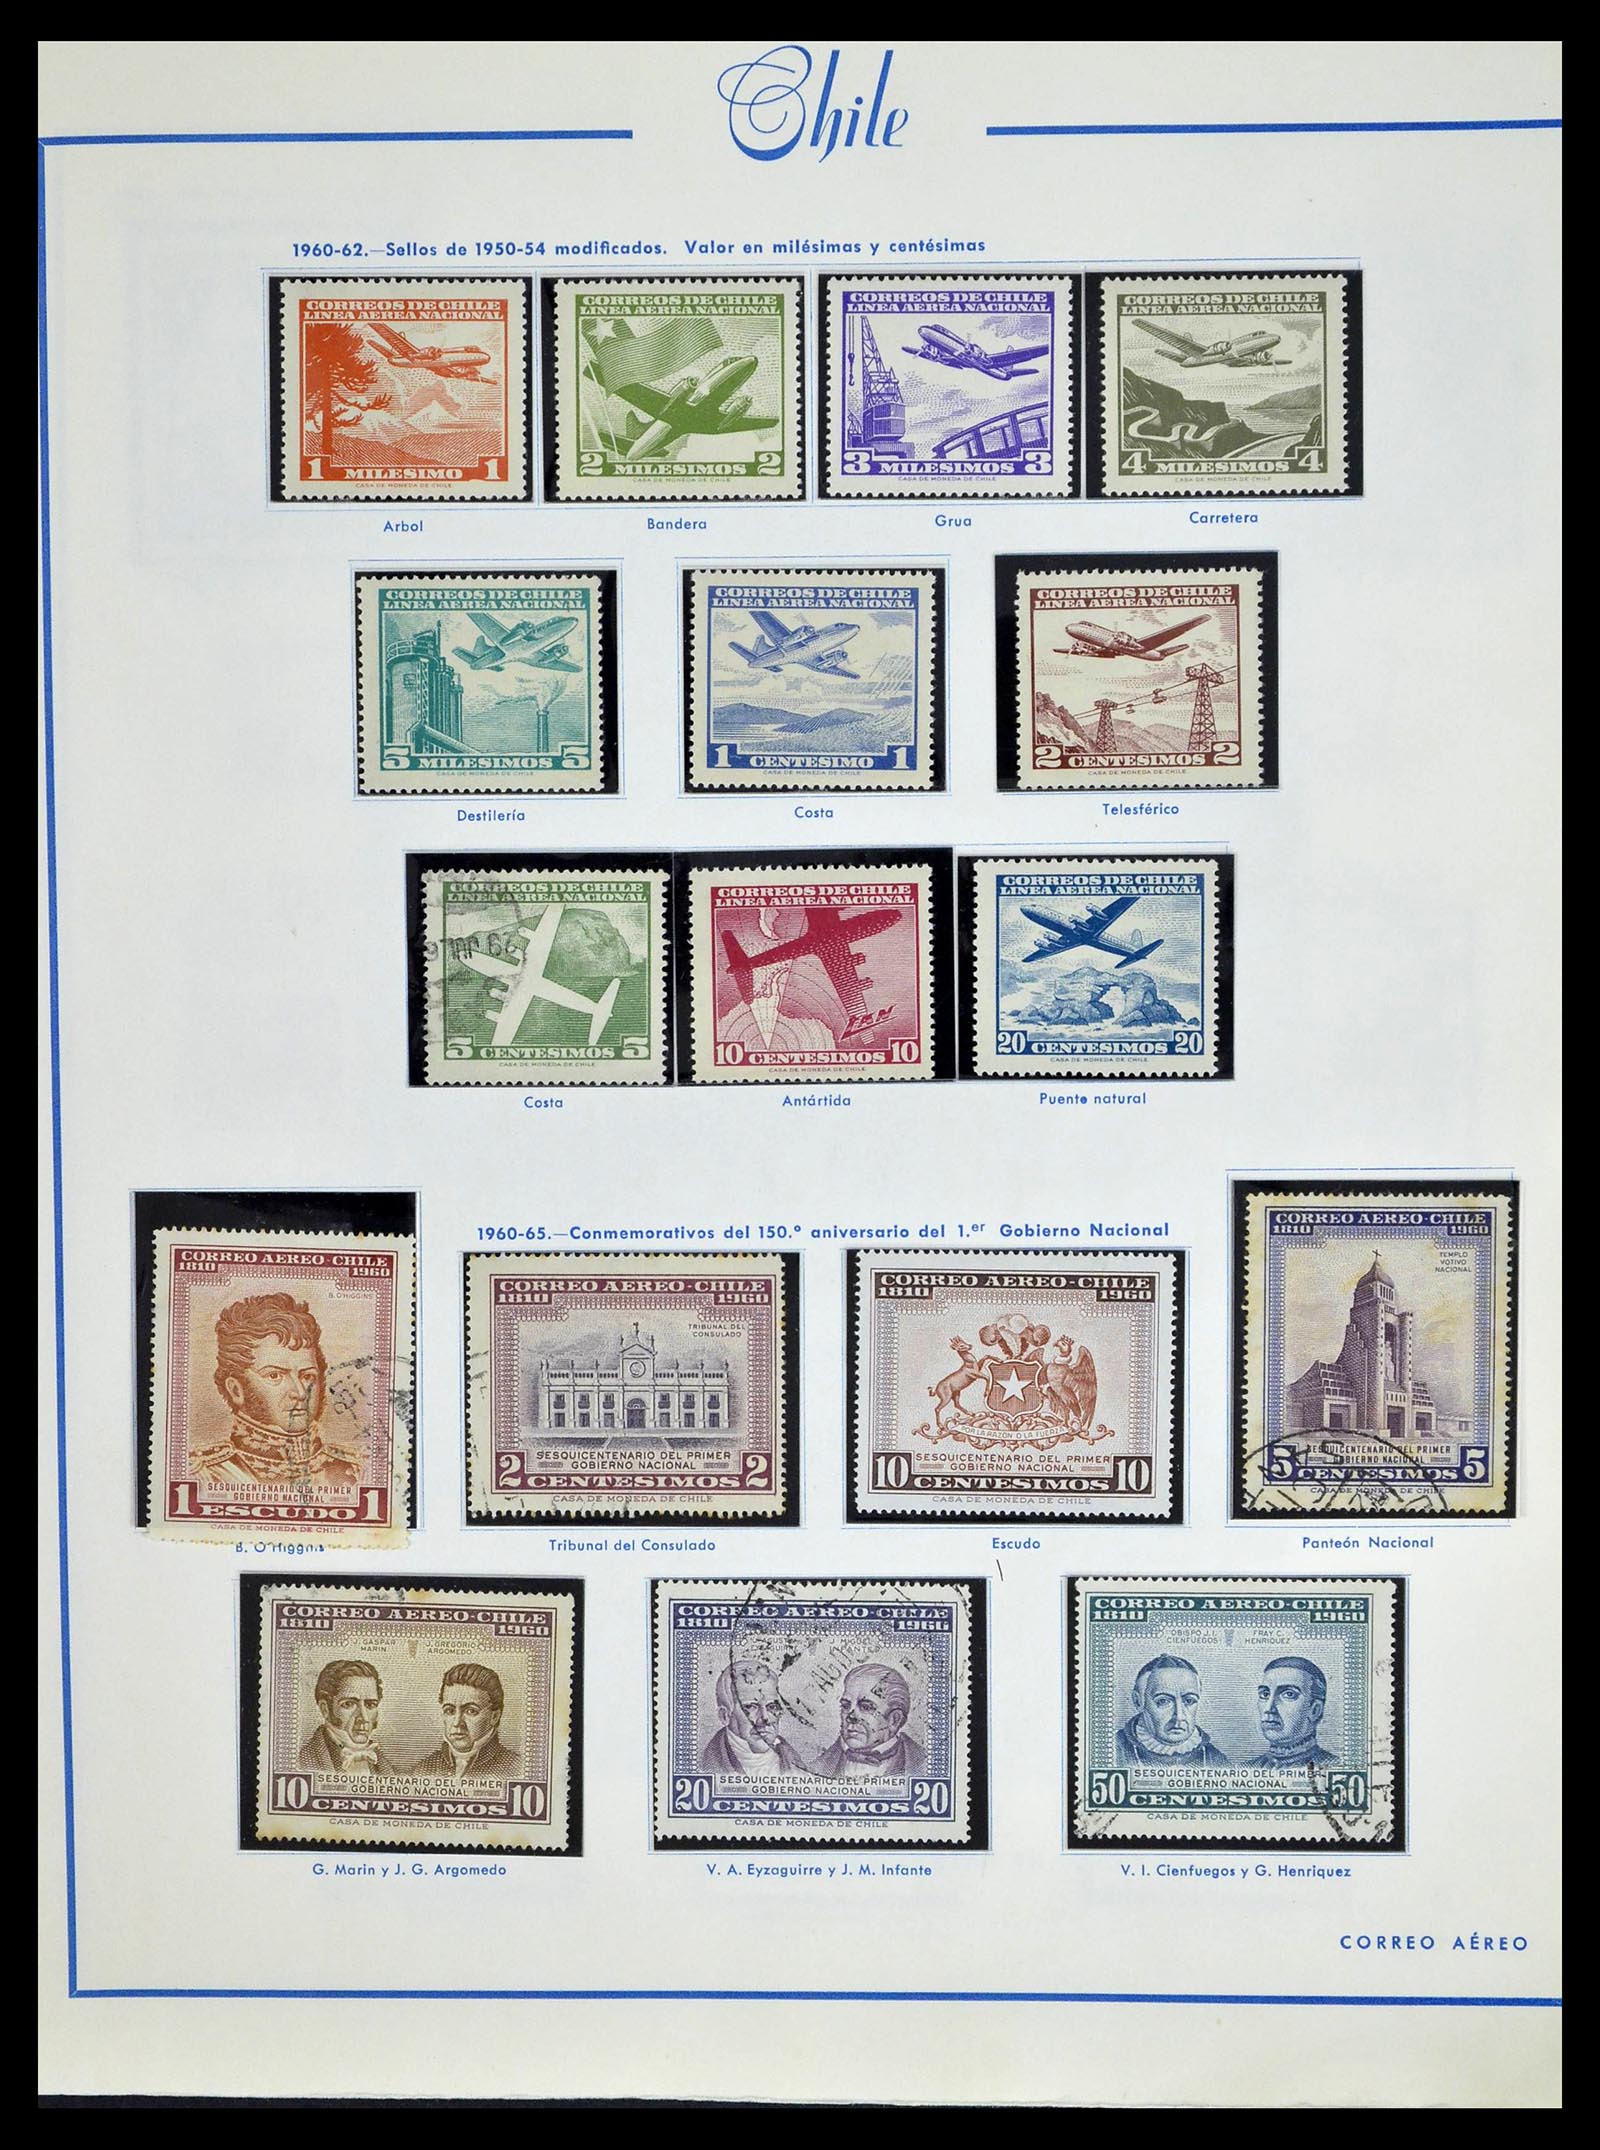 39213 0055 - Stamp collection 39213 Chile 1853-1970.